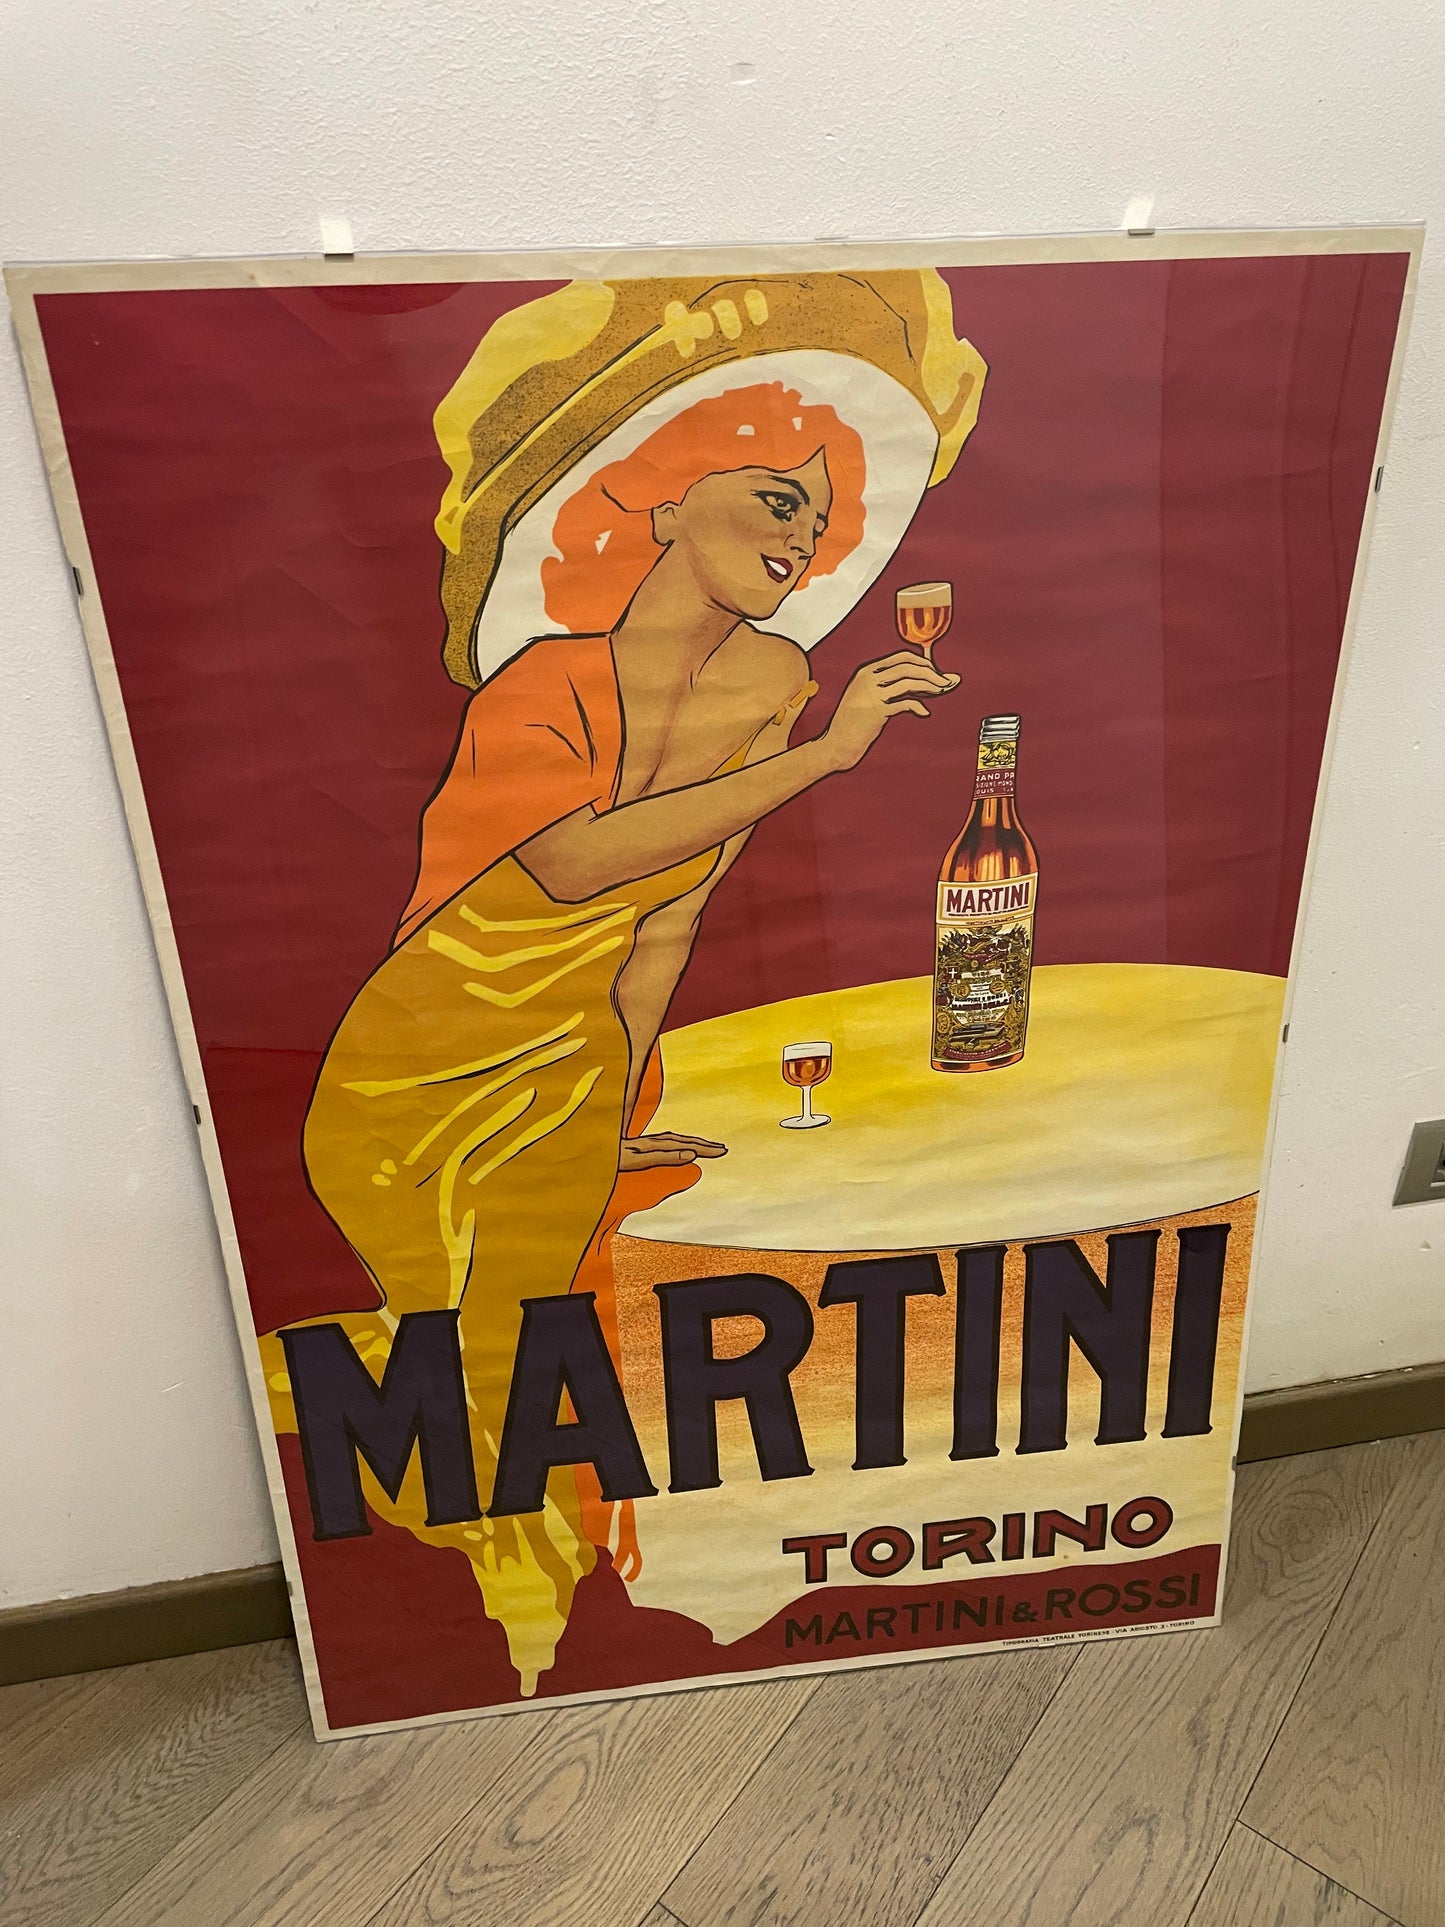 Original Martini &amp; Rossi Turin poster from the 70s